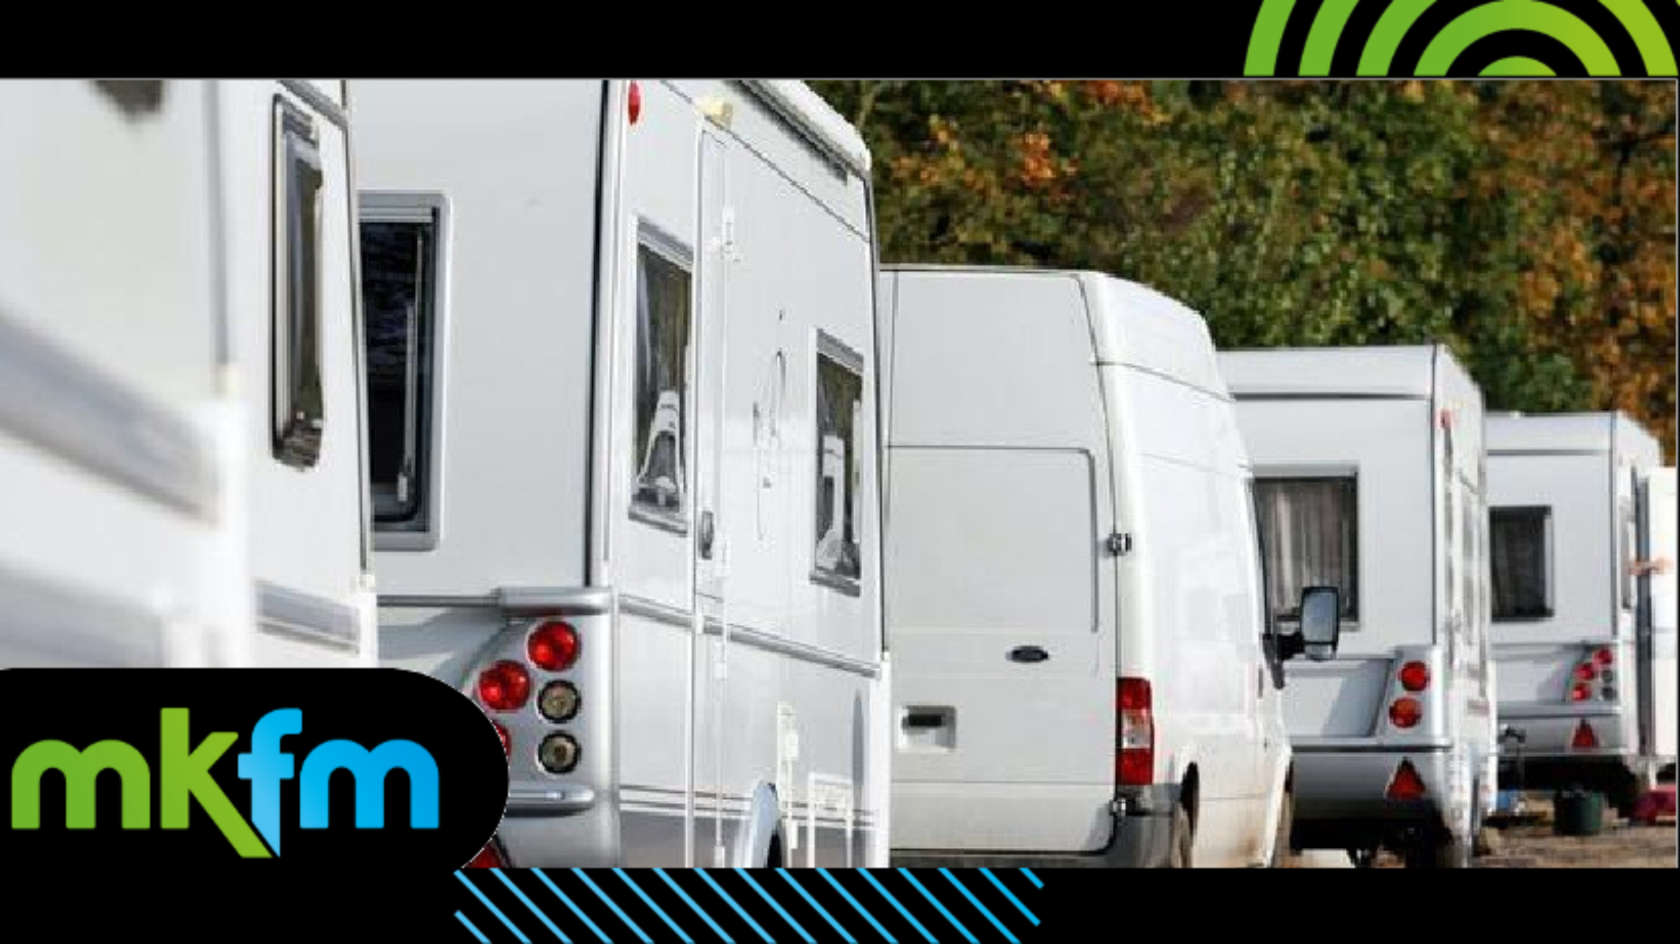 City Council and police ‘aware’ and ‘dealing’ with unauthorised encampments sites across Milton Keynes – MKFM 106.3FM